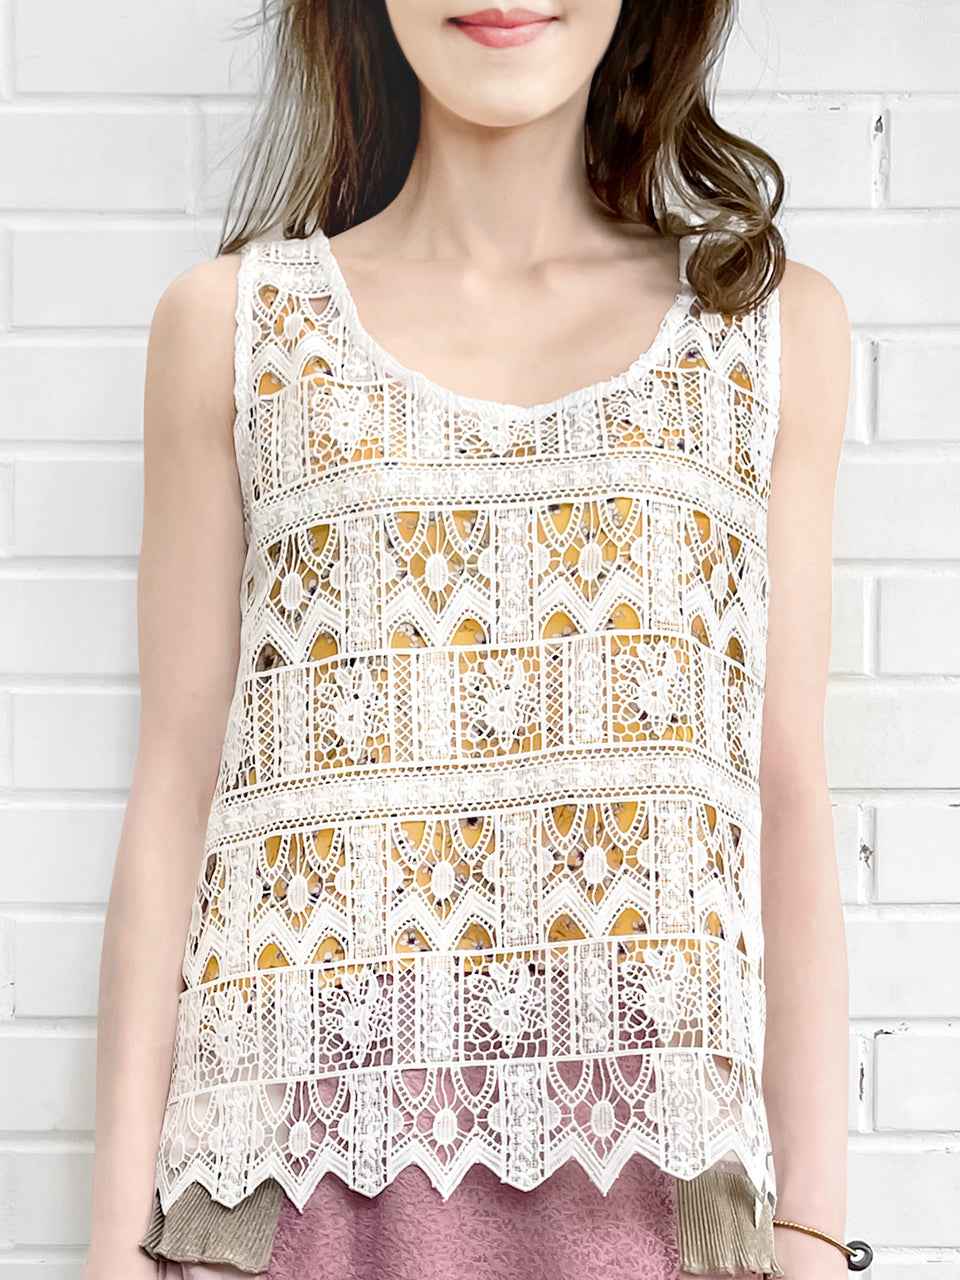 Surprise Sale! White Crochet Lace Relax Tank With Floral Camisole Lining